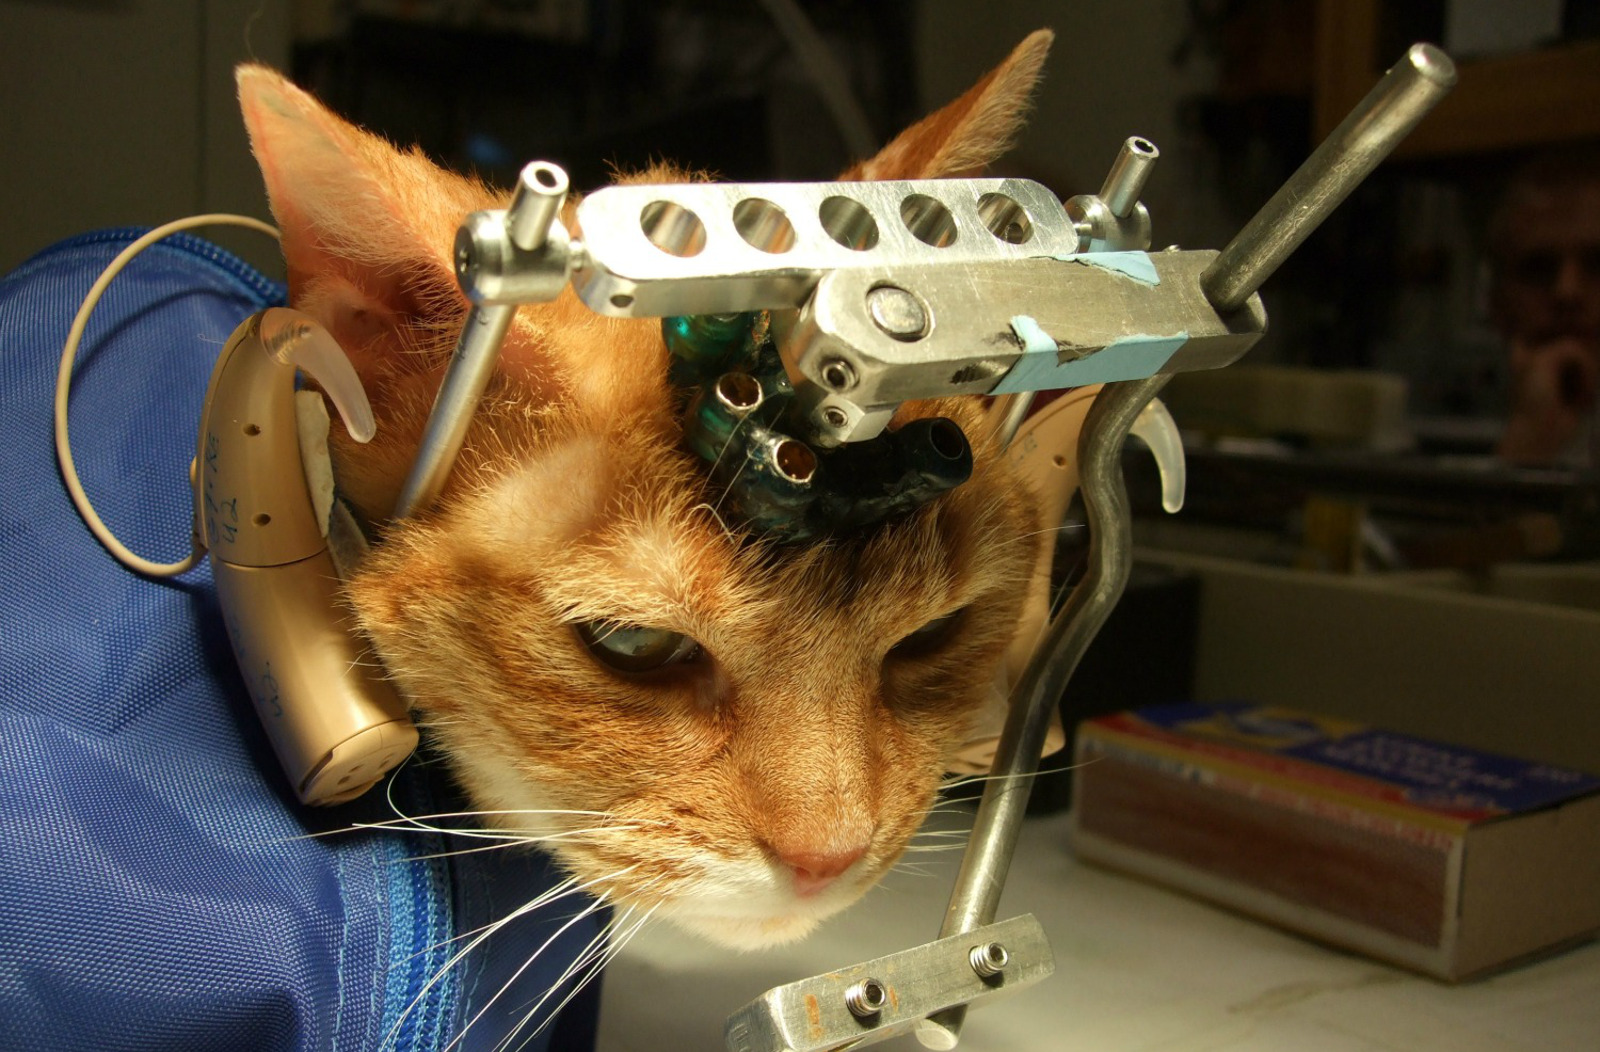 Can Animal Experimentation Be Justified for Medical Applications?